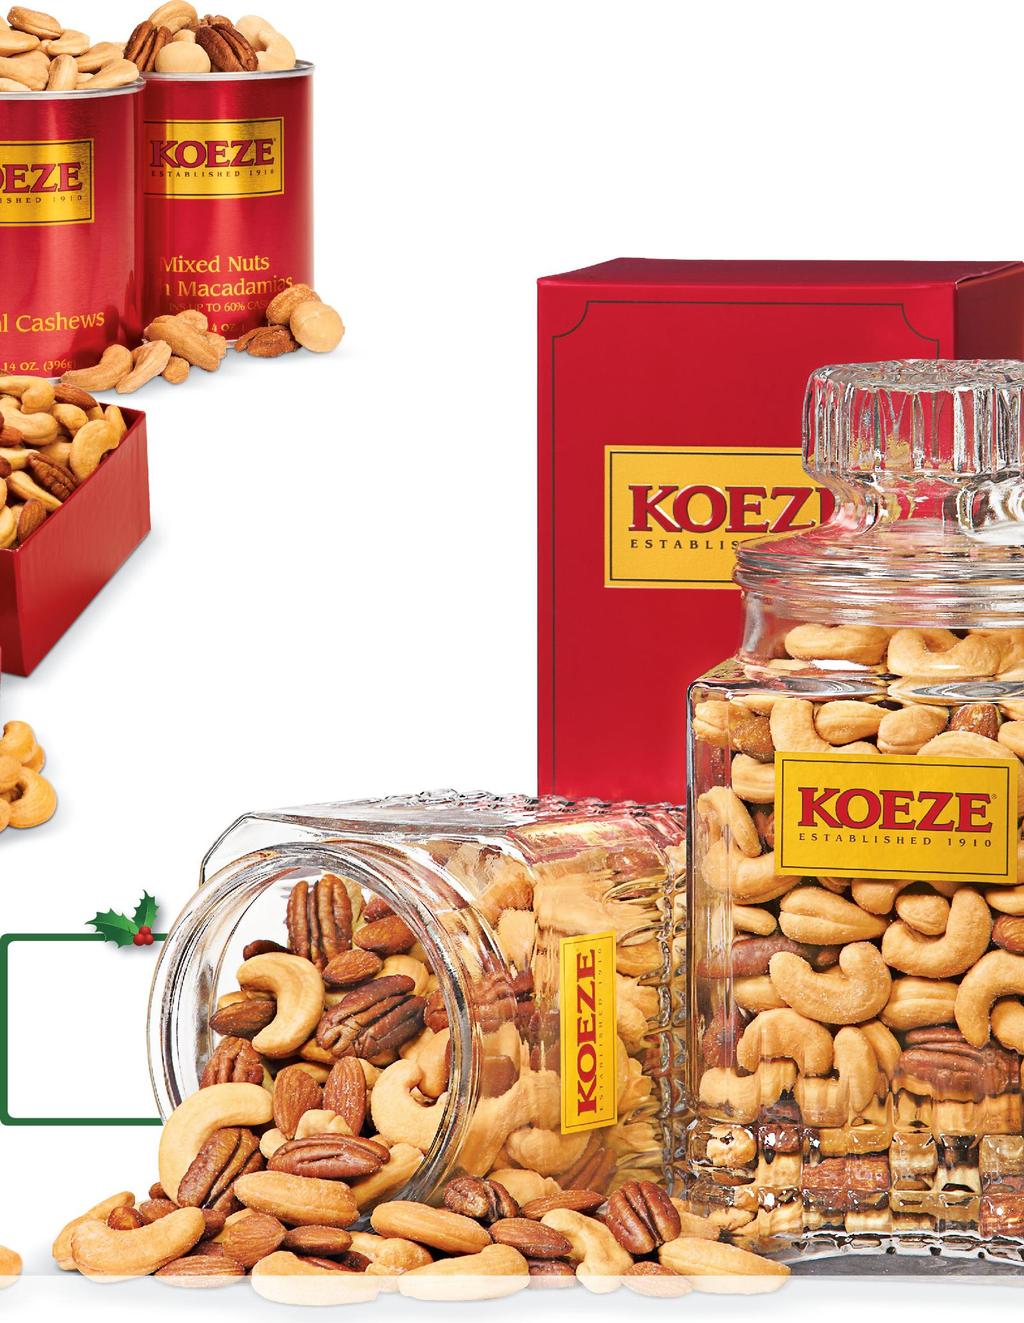 CLASSIC HOLIDAY MIXED NUTS FESTIVE NUT GIFTS Our festive red tins of nuts are always in demand for gifts or serving at your own holiday get-togethers. #31262 Colossal Cashews 14 oz. Gift Tin $24.